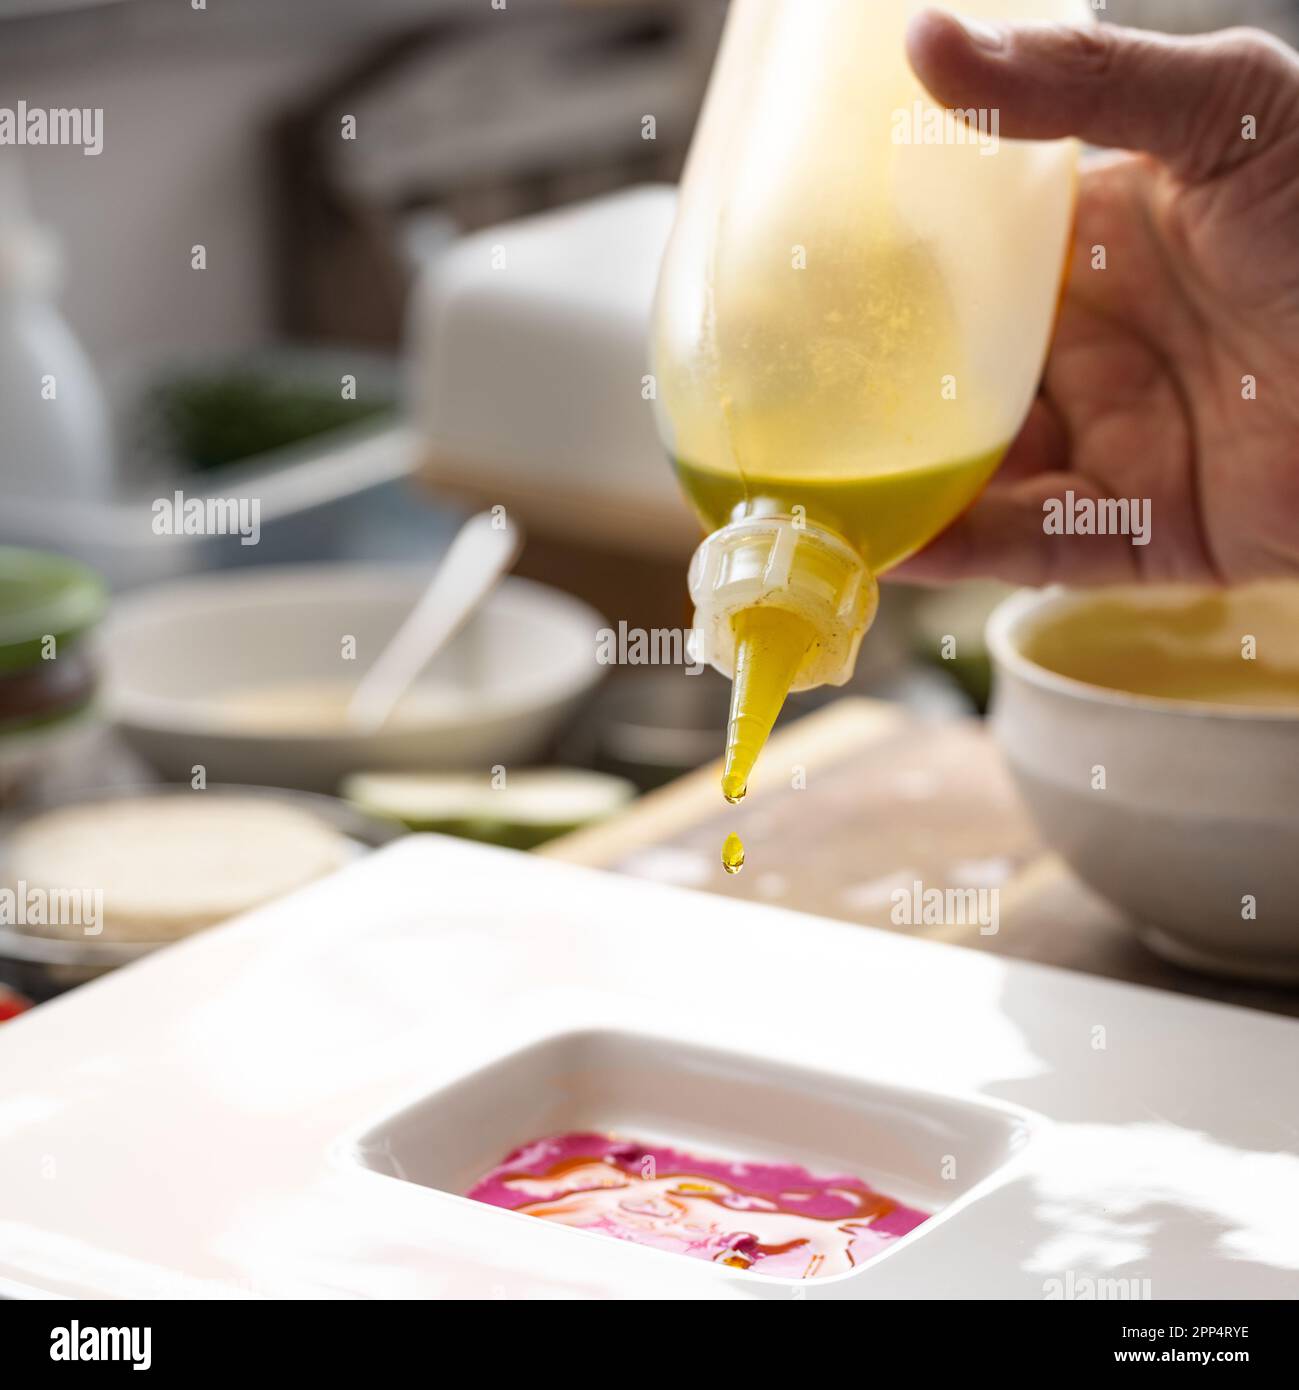 Gourmet chef dripping precious oil from a bottle into a beetroot sauce to prepare a menu course on a white plate, creative cooking concept, selected f Stock Photo